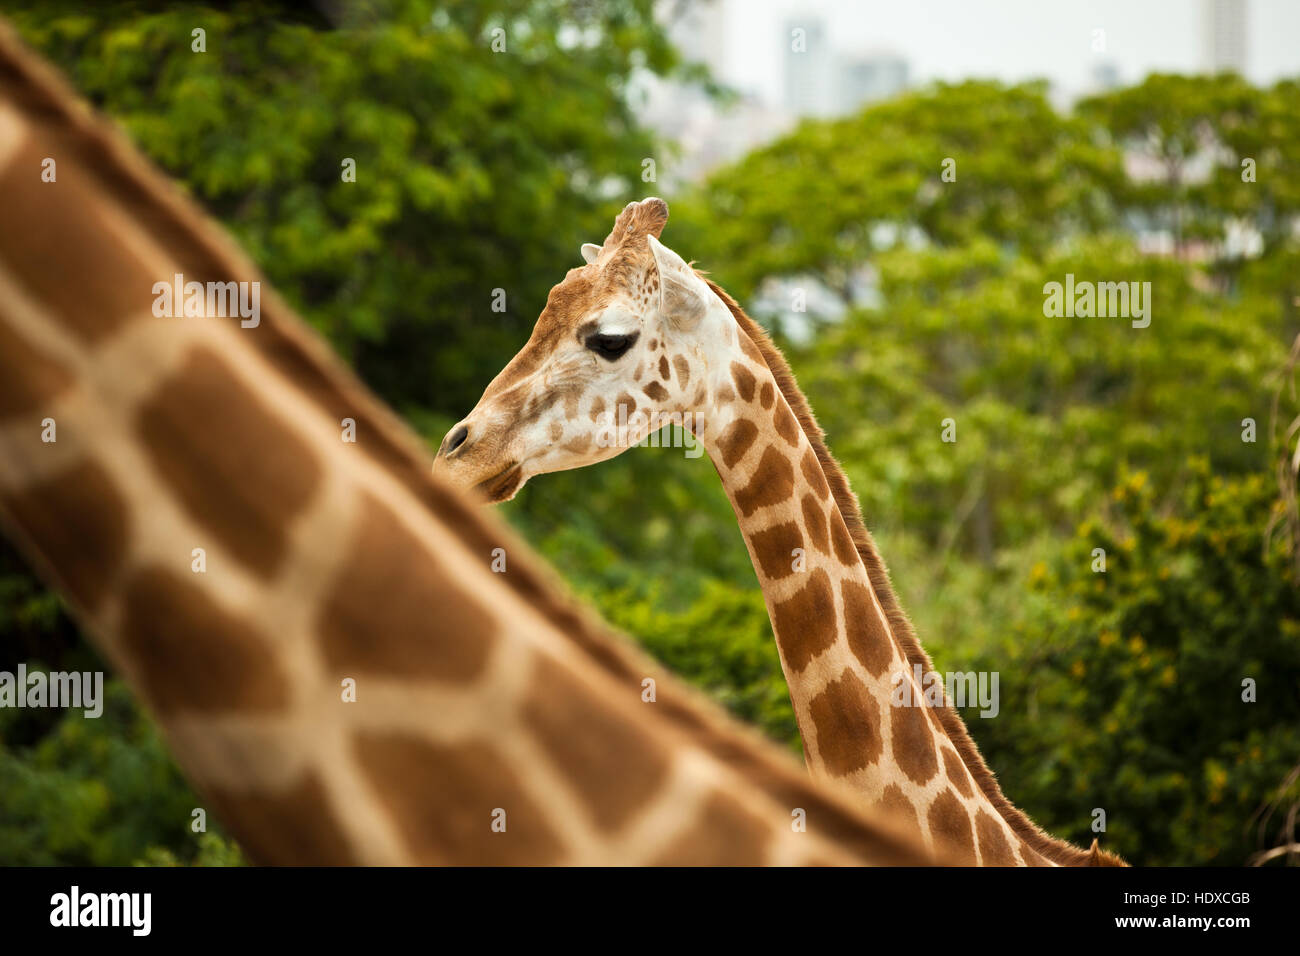 Two giraffes in a park in front of trees with city buildings out of focus in the background Stock Photo